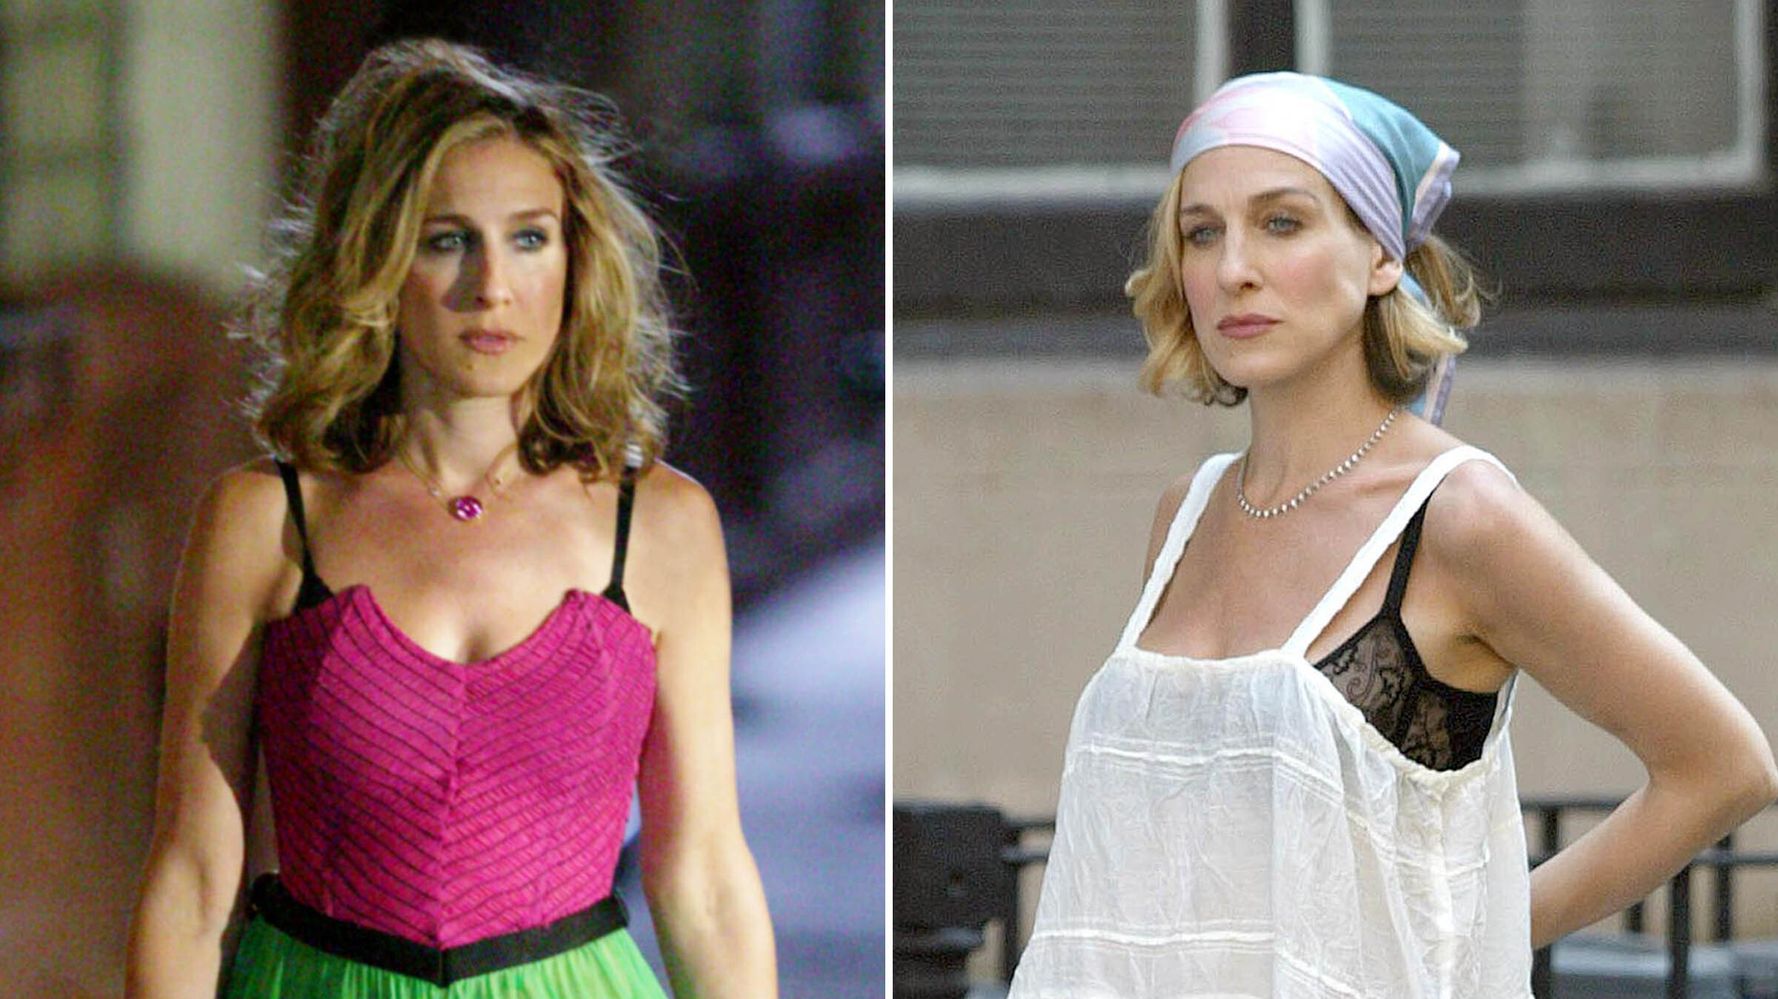 Visible Bra Straps Are Back. Stylists Advise How To Pull Off The Look.